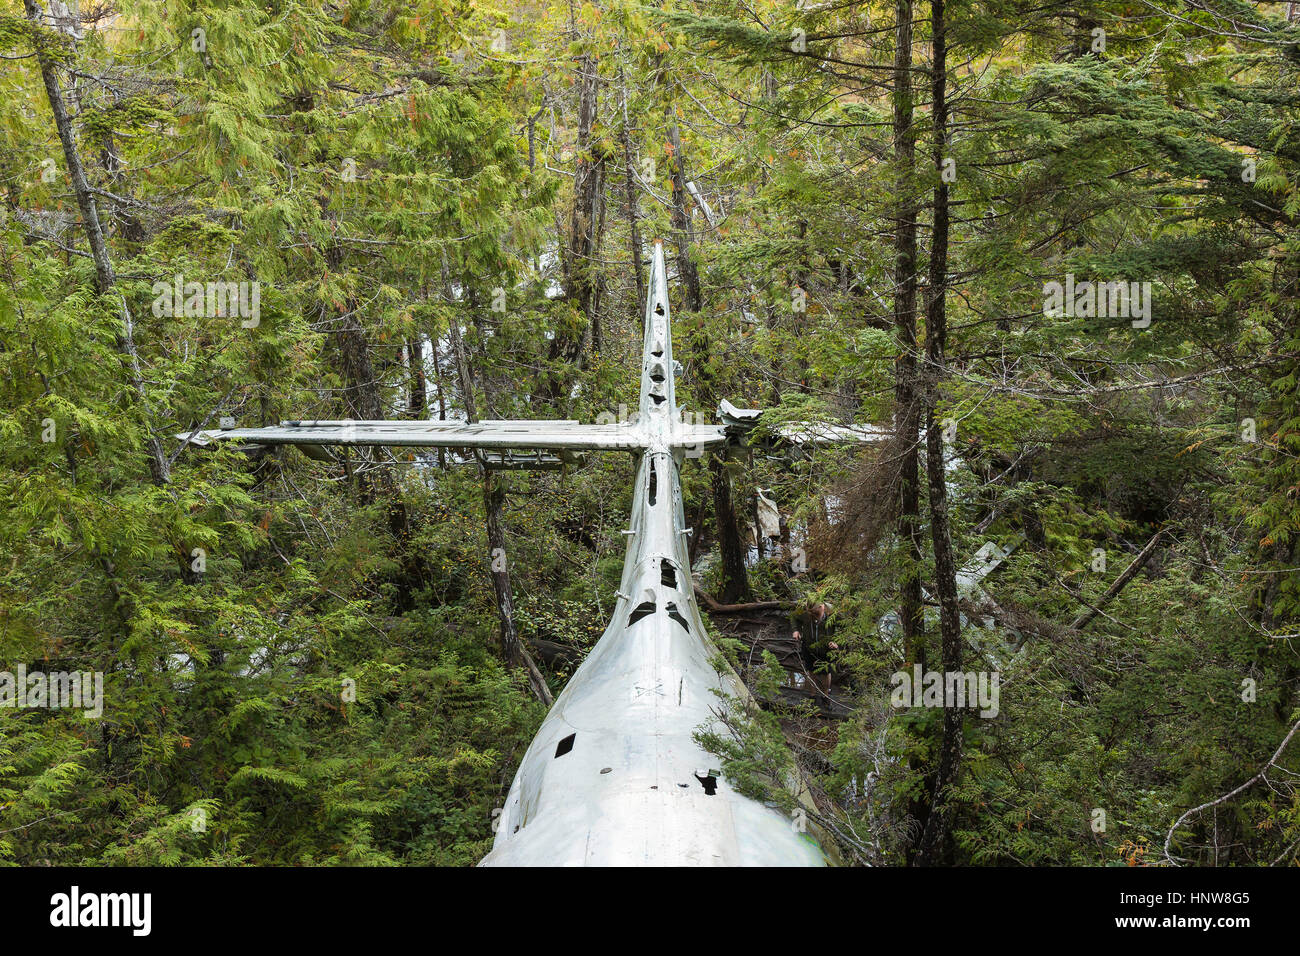 WW2 airplane wreckage in rainforest, Pacific Rim National Park, Vancouver Island, British Columbia, Canada Stock Photo